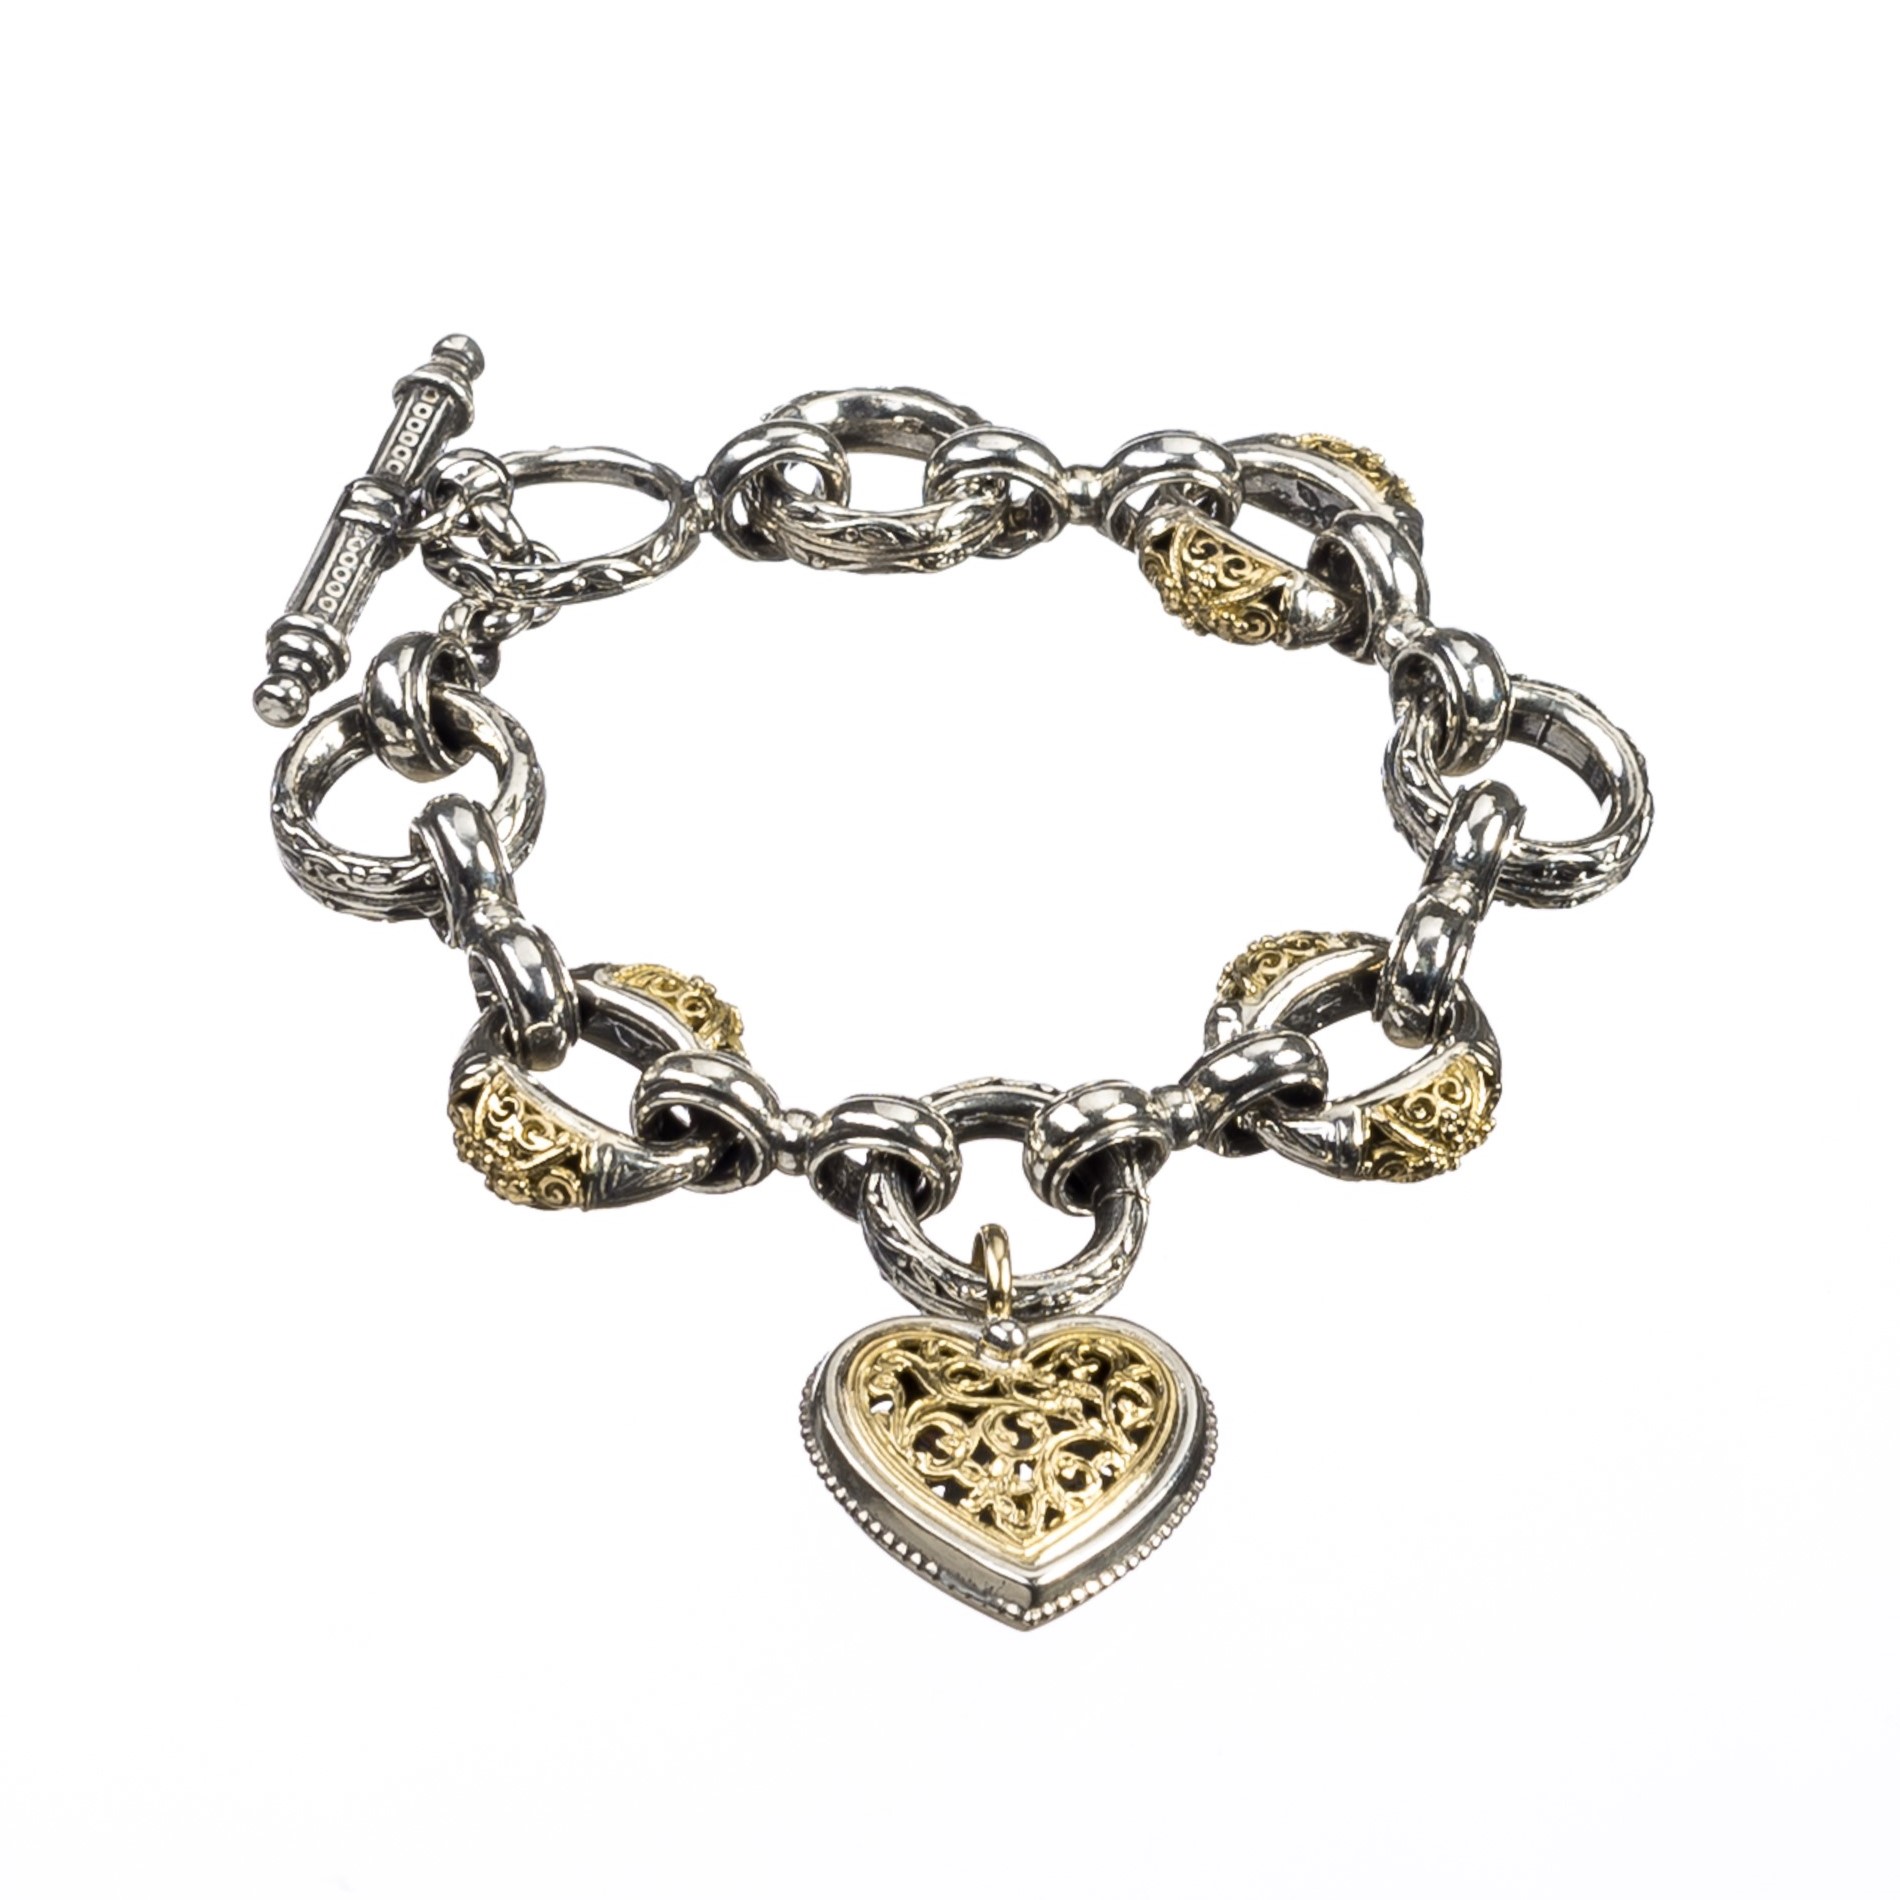 Garden Shadows Heart Charm bracelet in 18K Gold and Sterling Silver